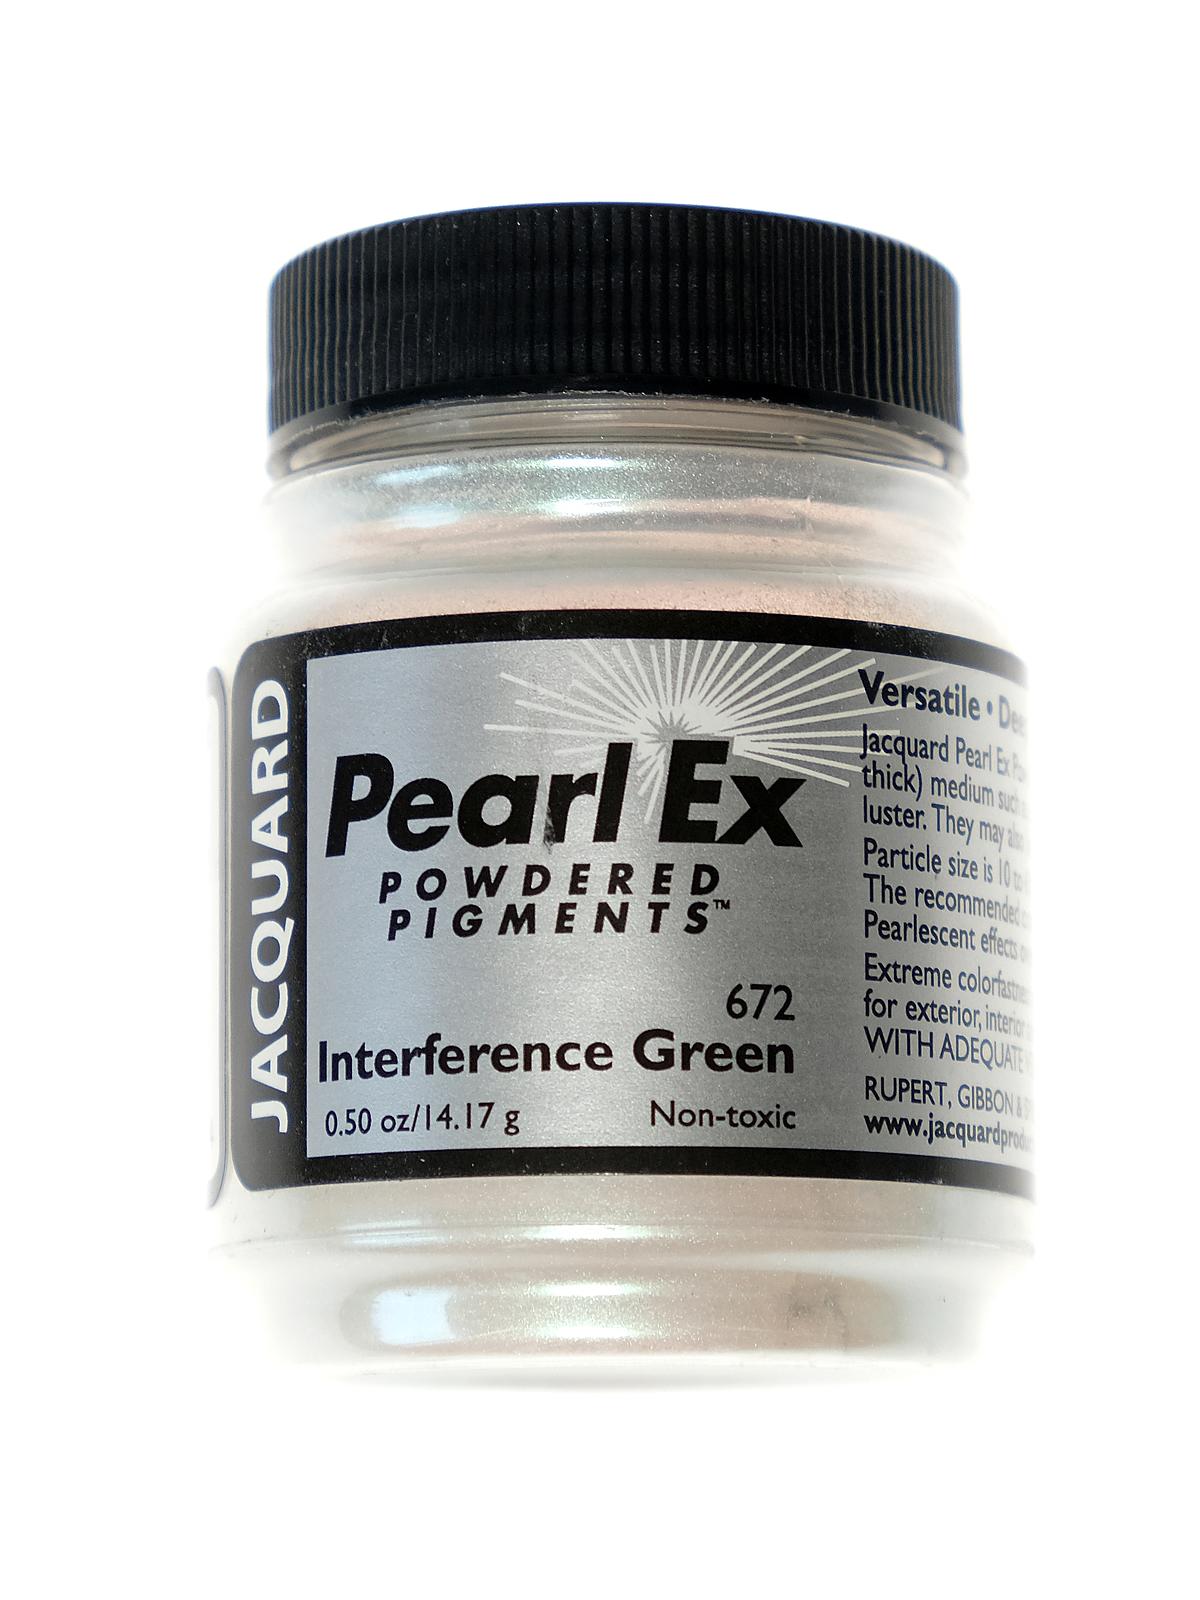 Pearl Ex Powdered Pigments Interference Green 0.50 Oz.